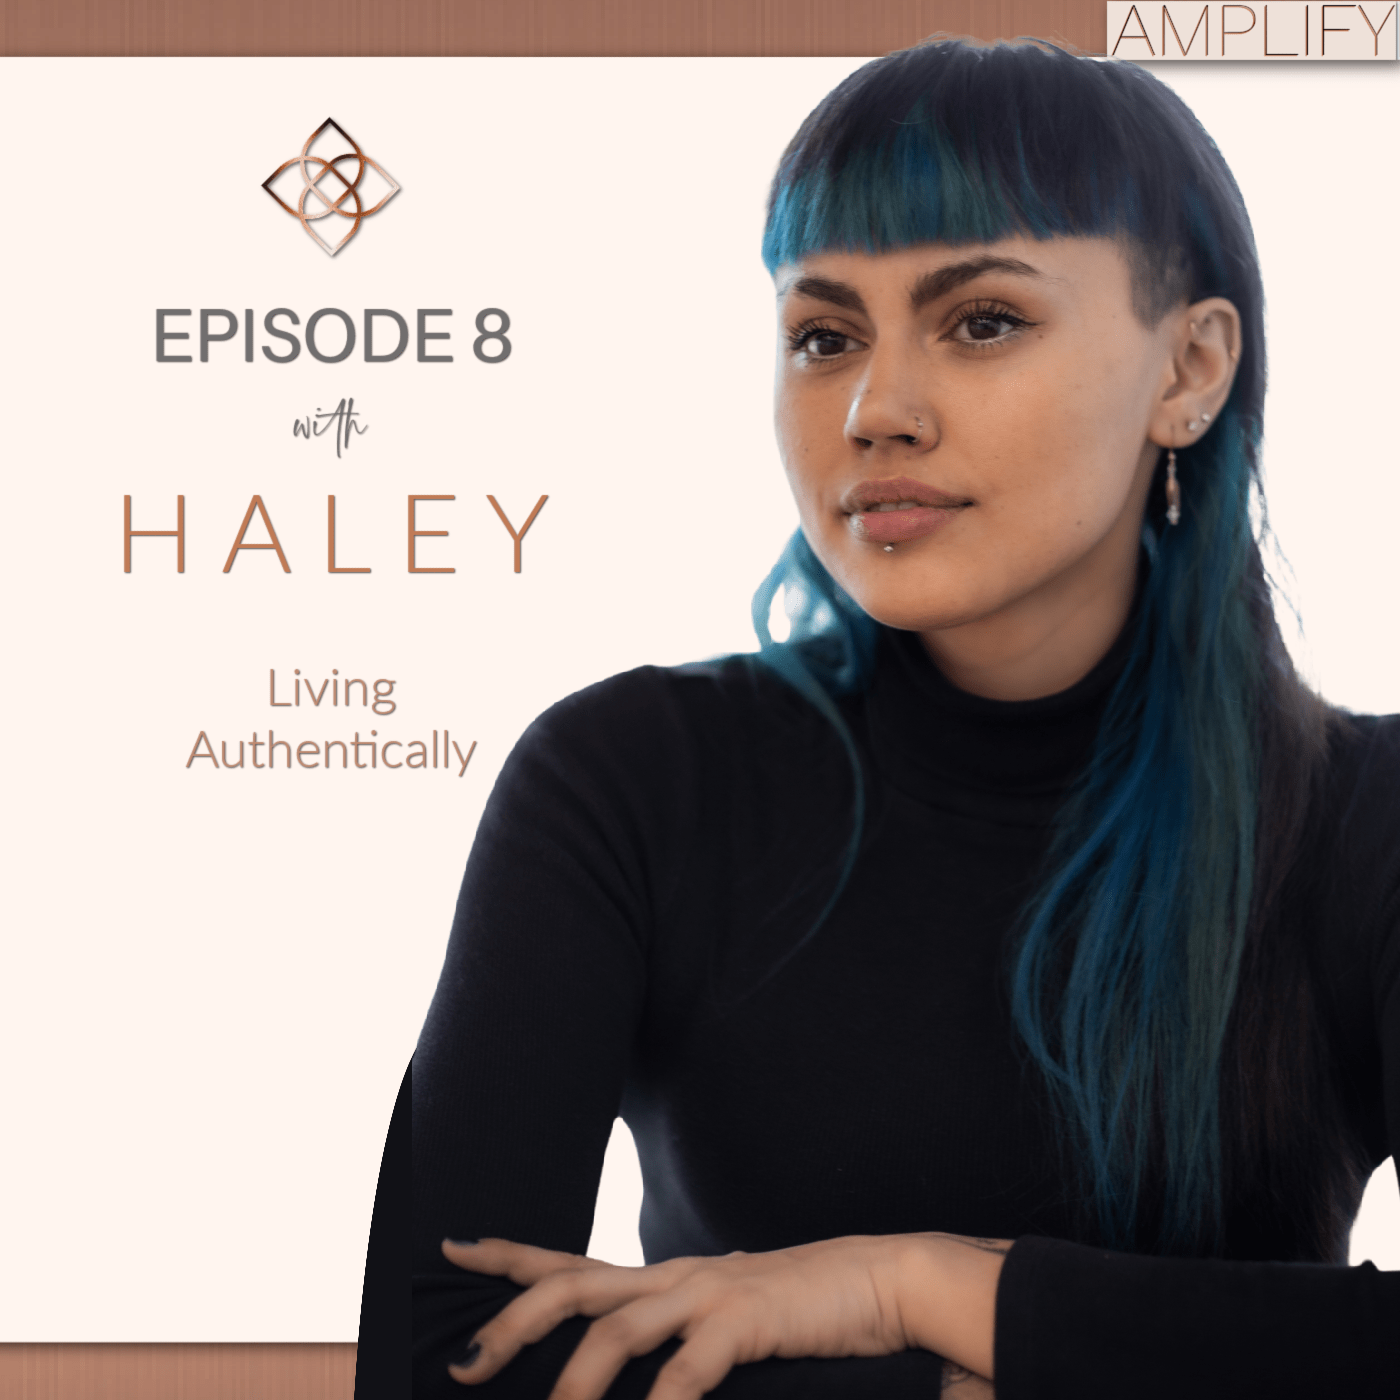 RevolutionHer Podcast guest HALEY